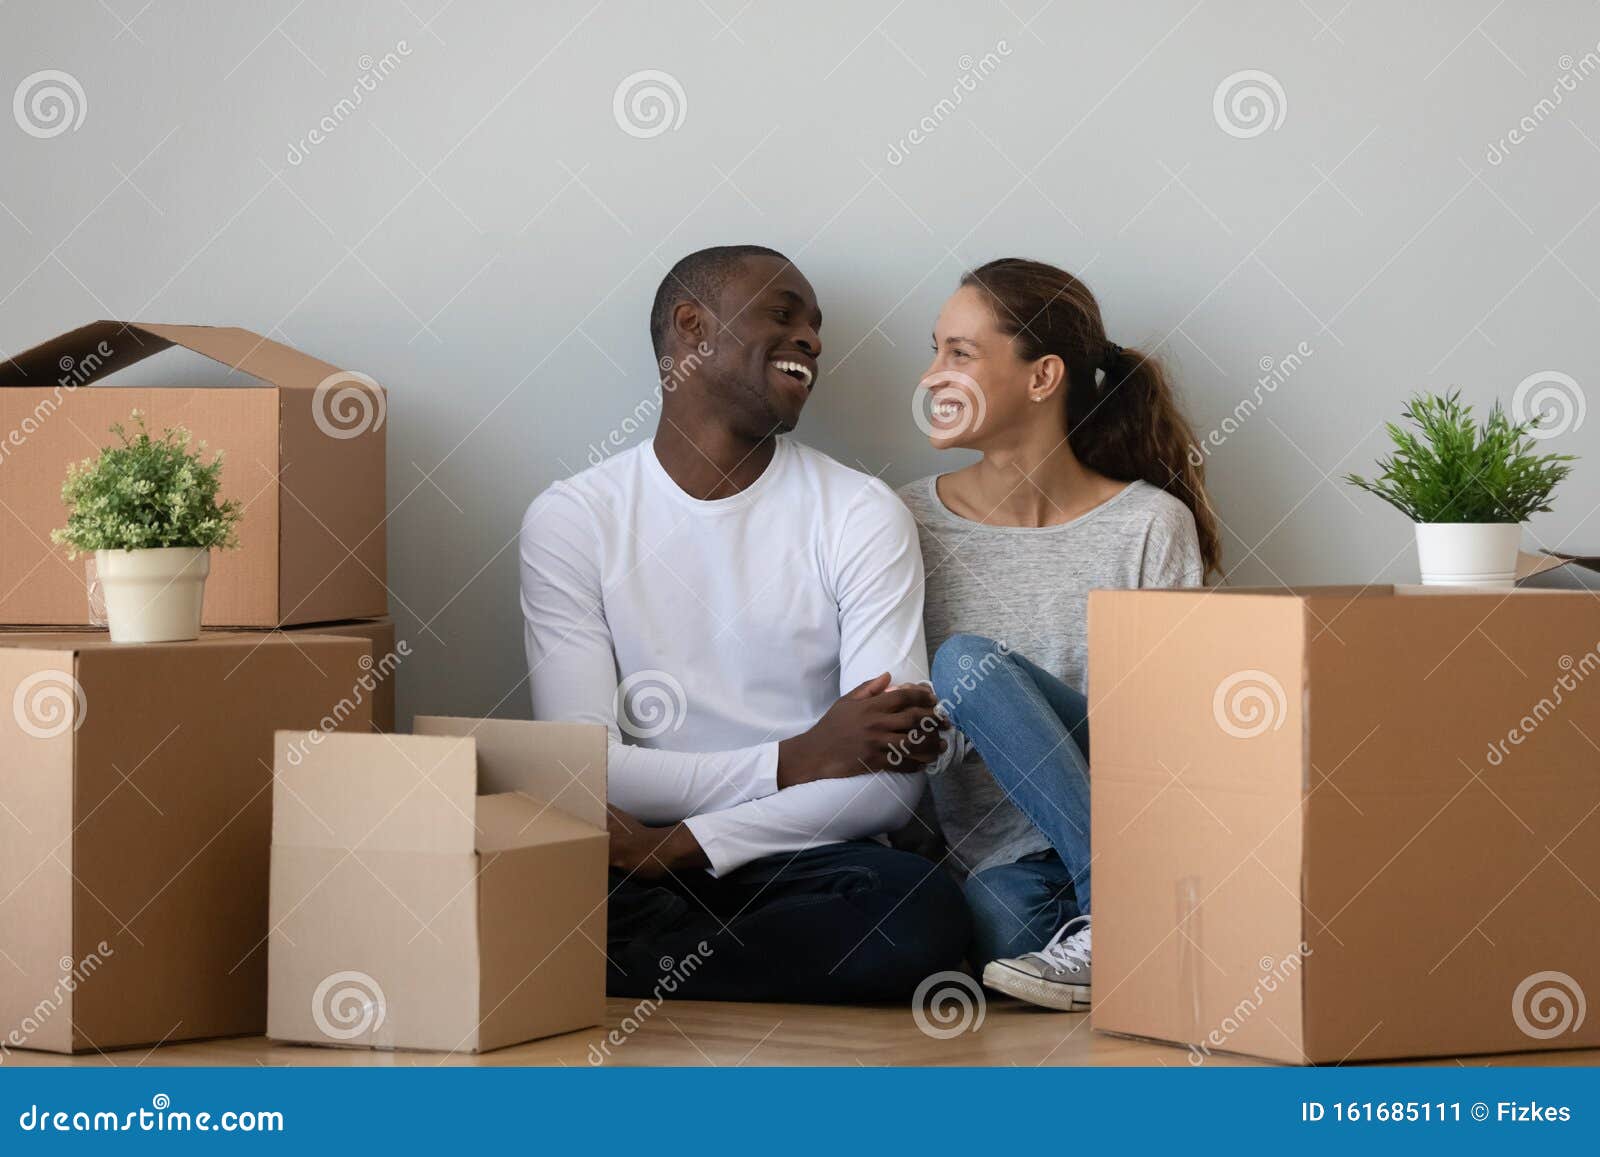 happy multiethnic couple moving to new home together